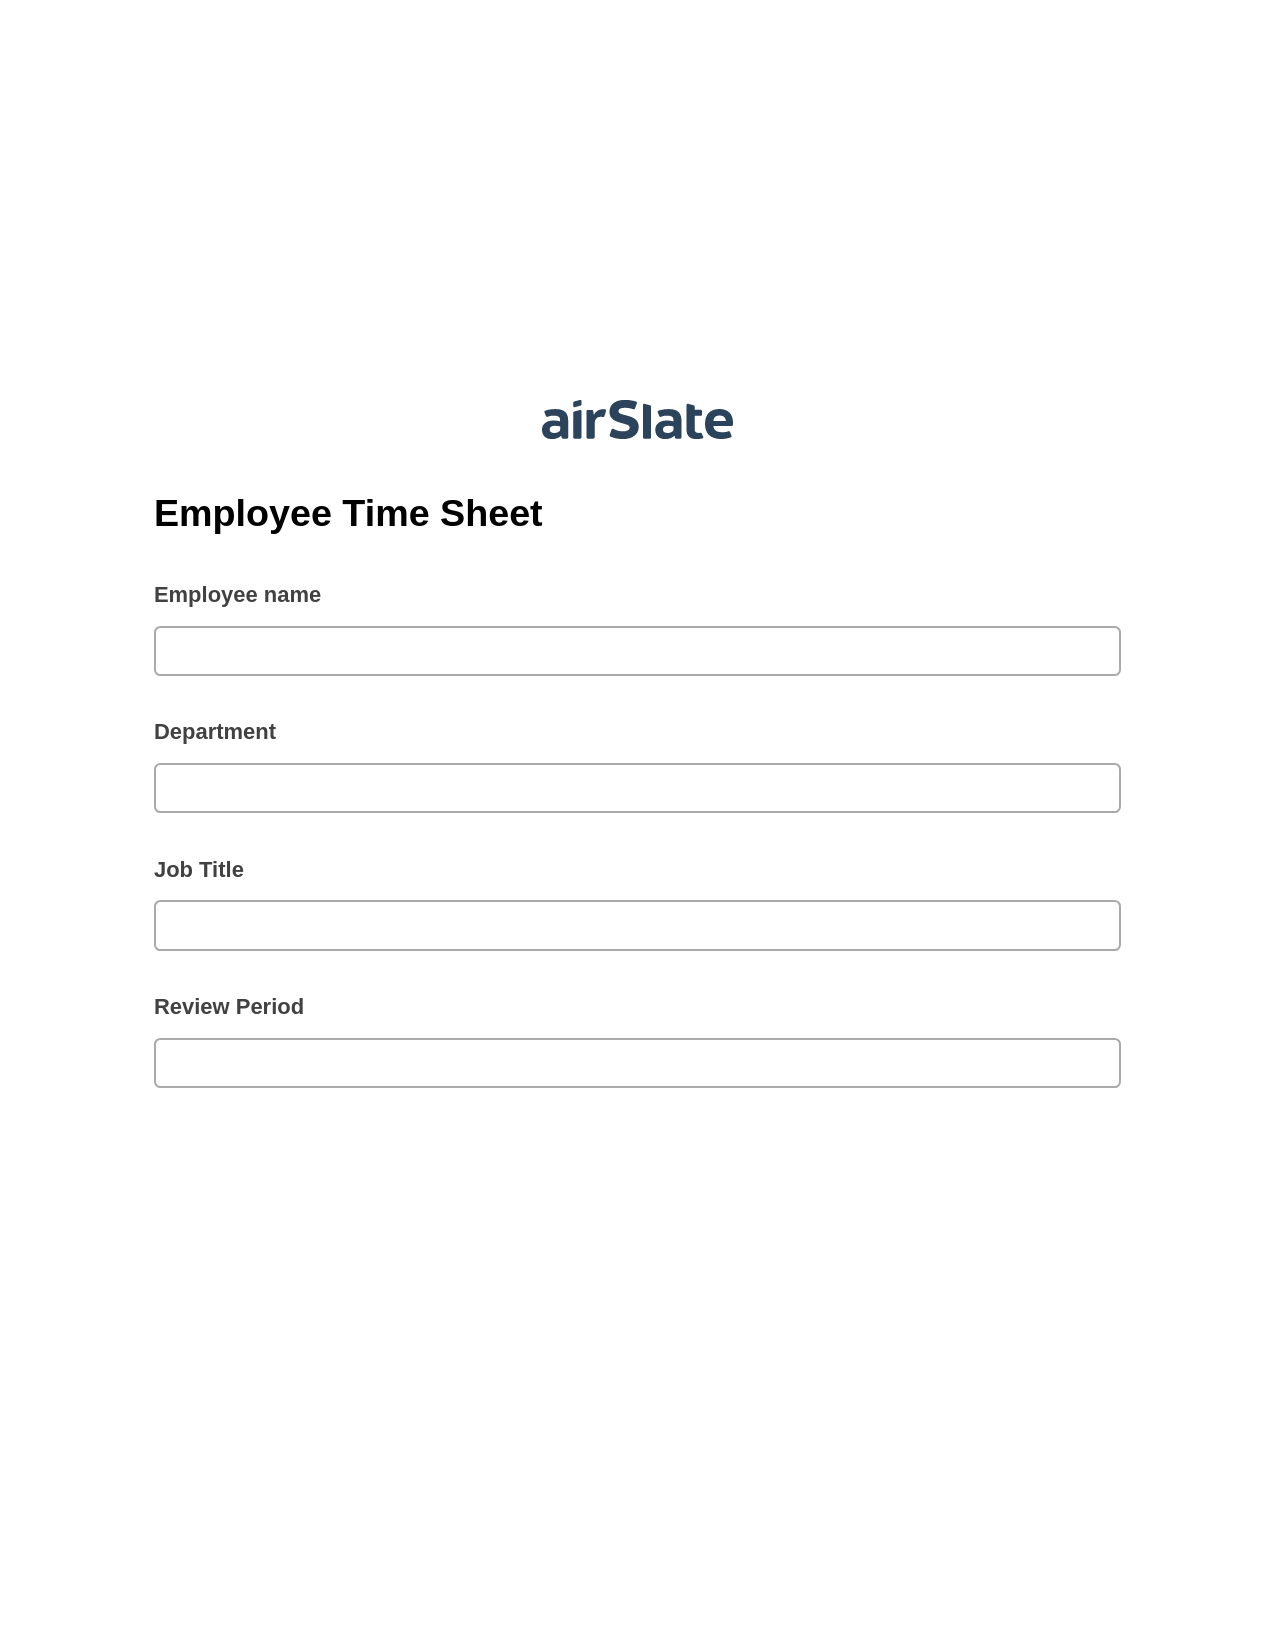 Multirole Employee Time Sheet Pre-fill Dropdowns from Office 365 Excel Bot, Remove Slate Bot, Archive to Dropbox Bot